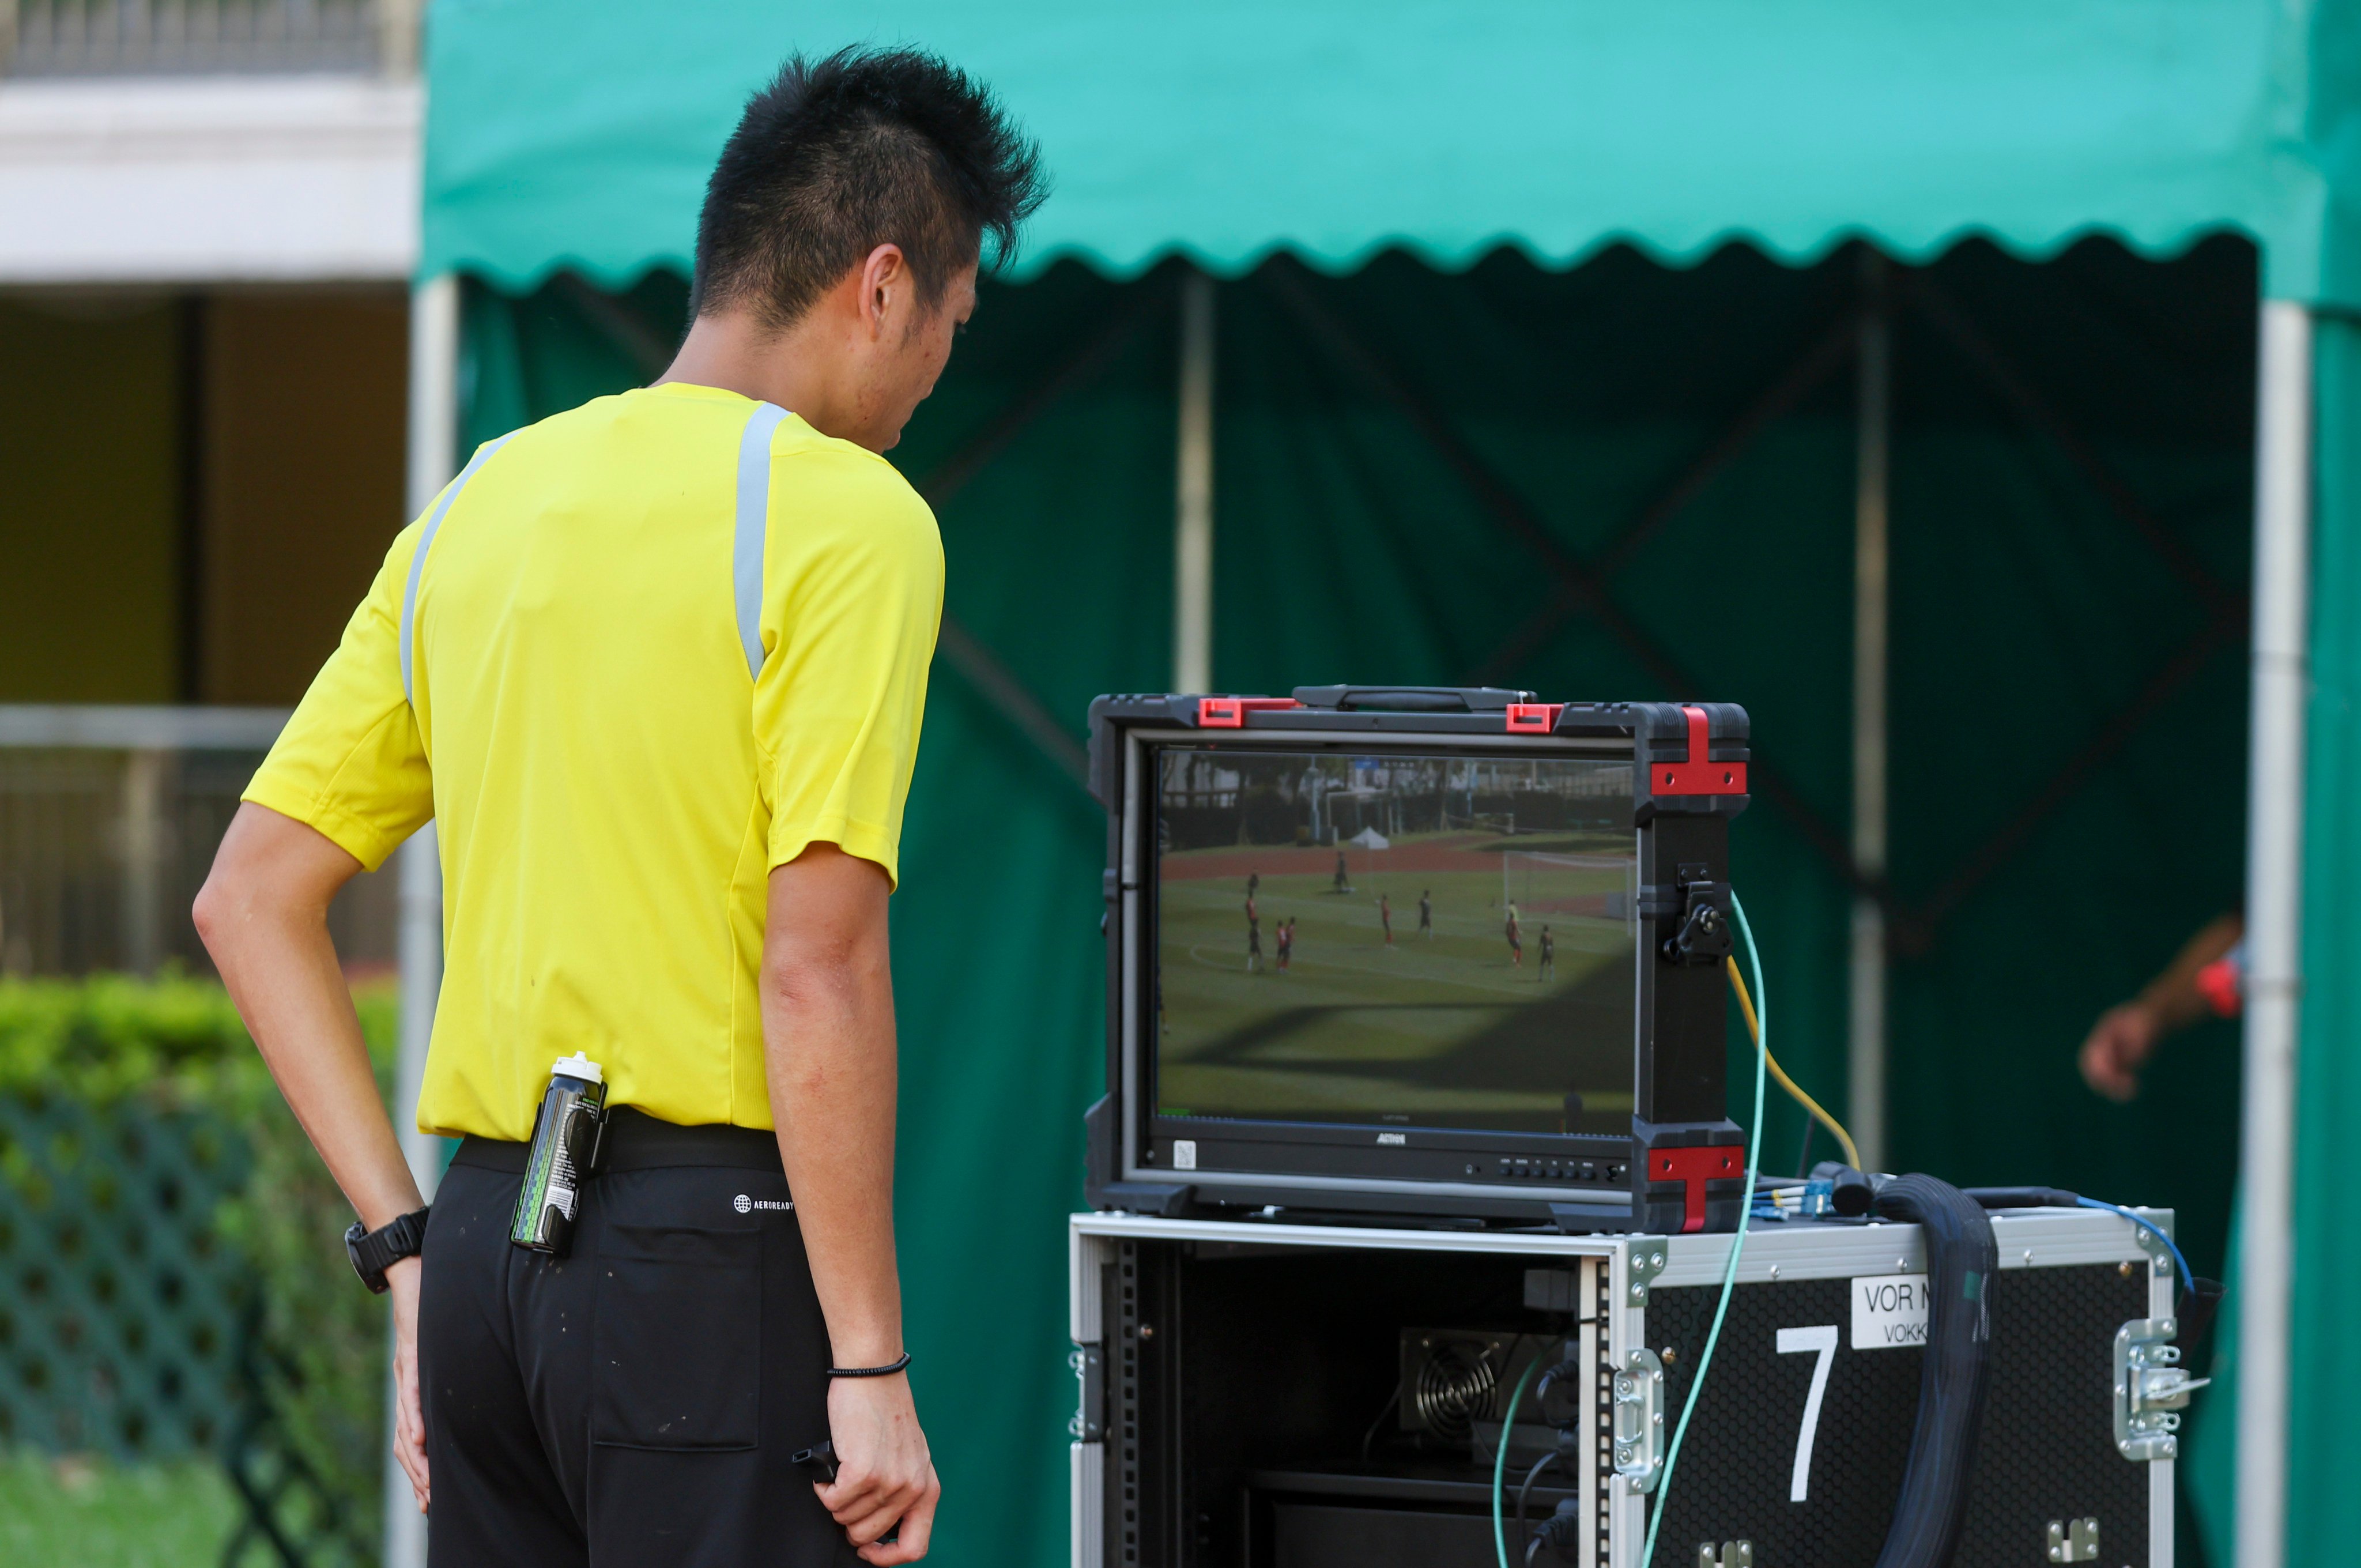 A video replay is viewed during the match between Sham Shui Po and North District. Photo: Edmond So